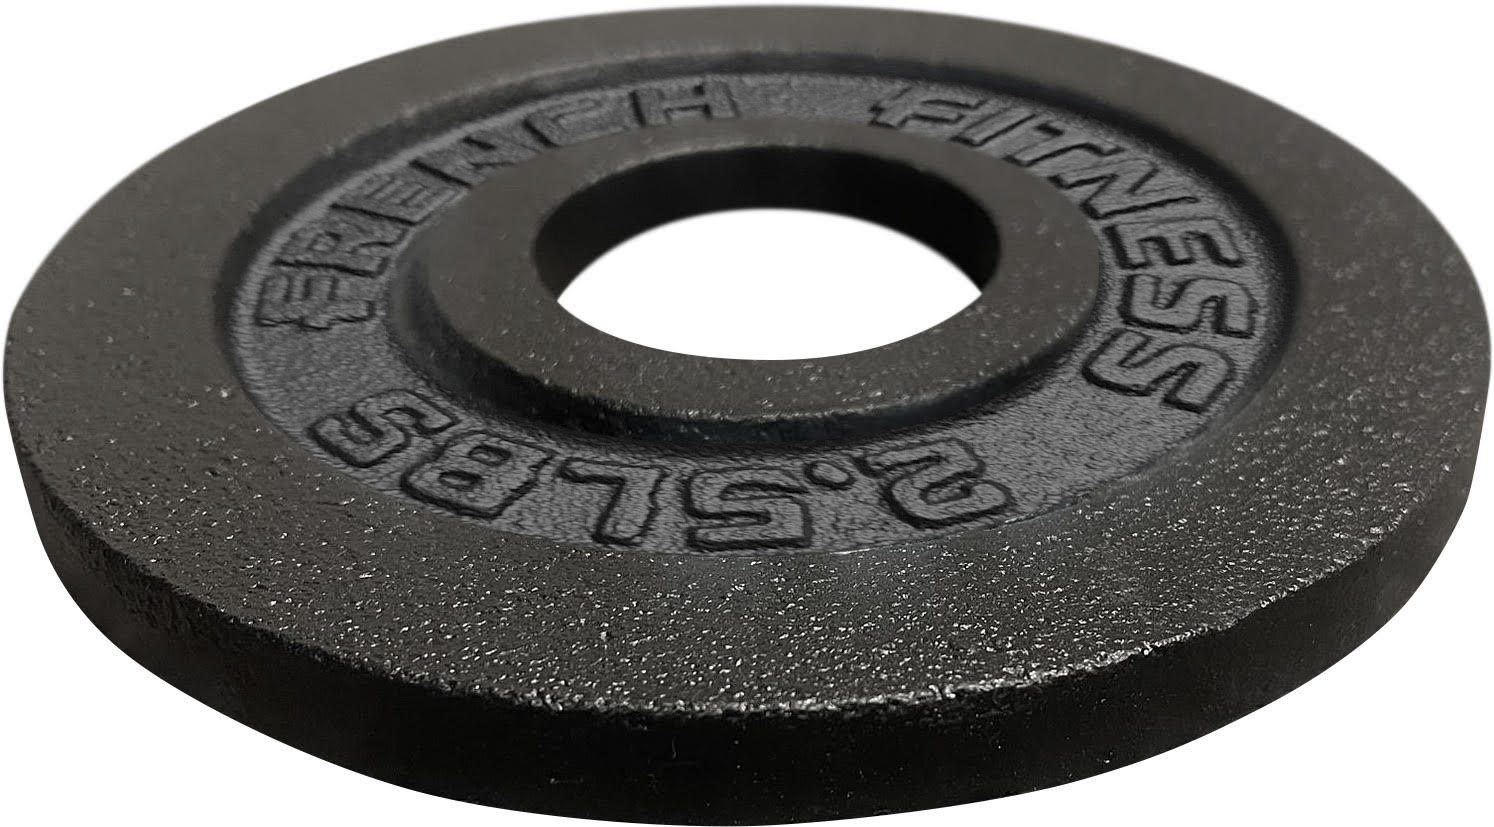 Grind Fitness Cast Iron Olympic Plates, 5lb